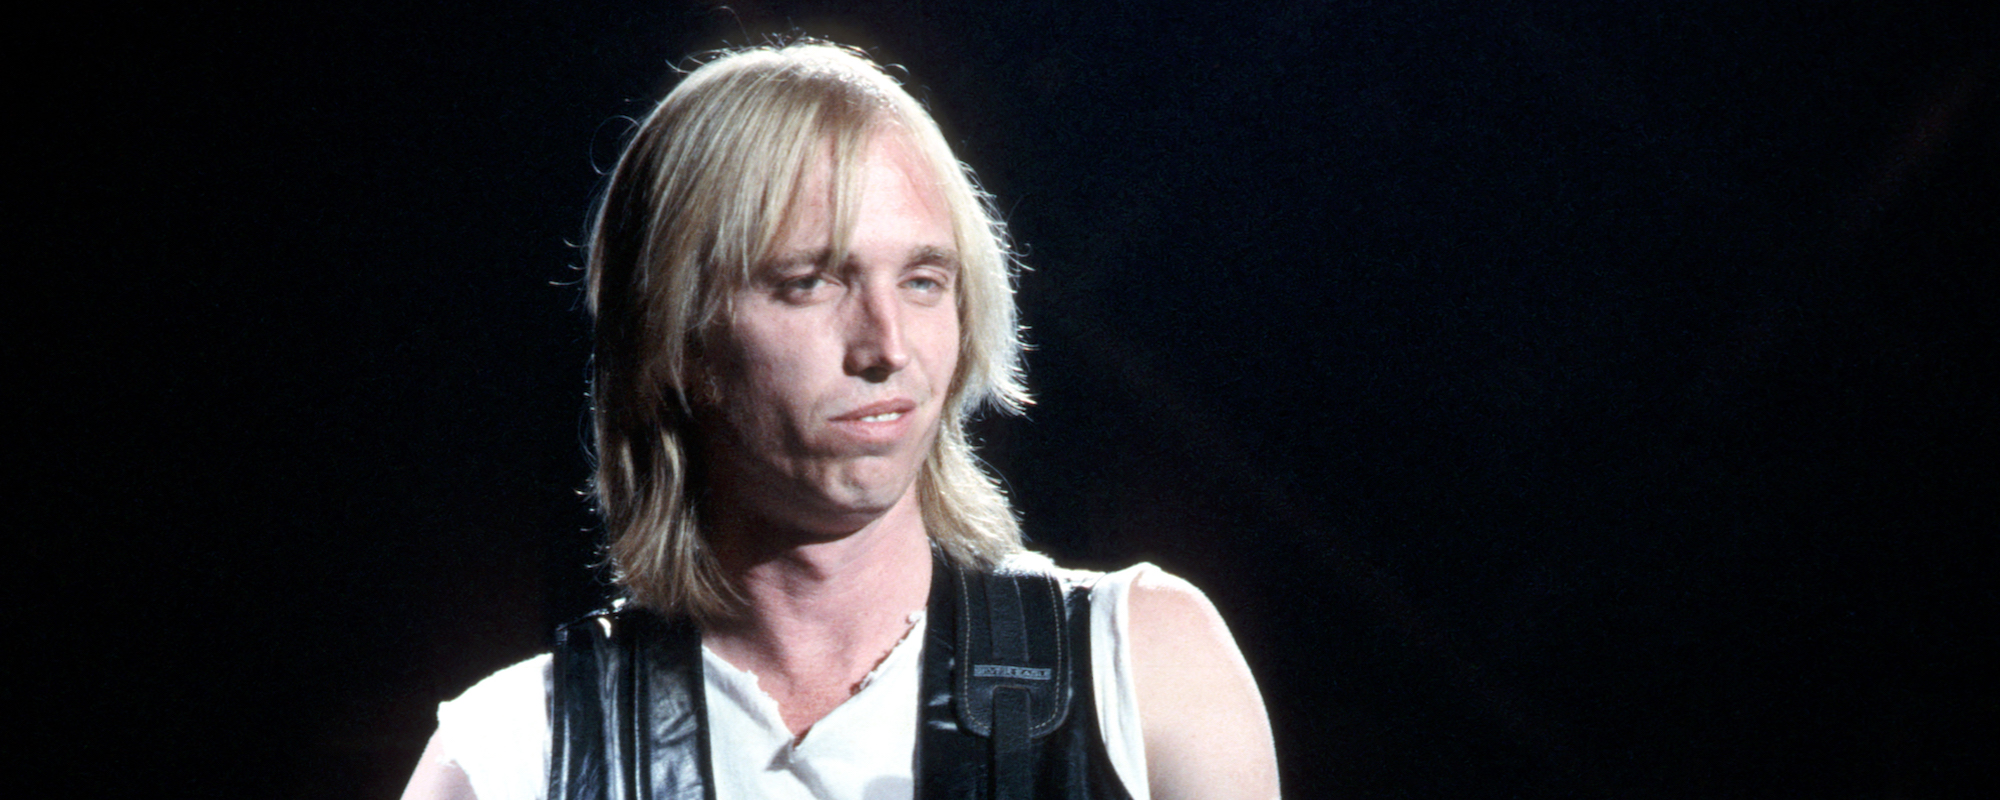 3 Songs for People Who Say They Don’t Like Tom Petty